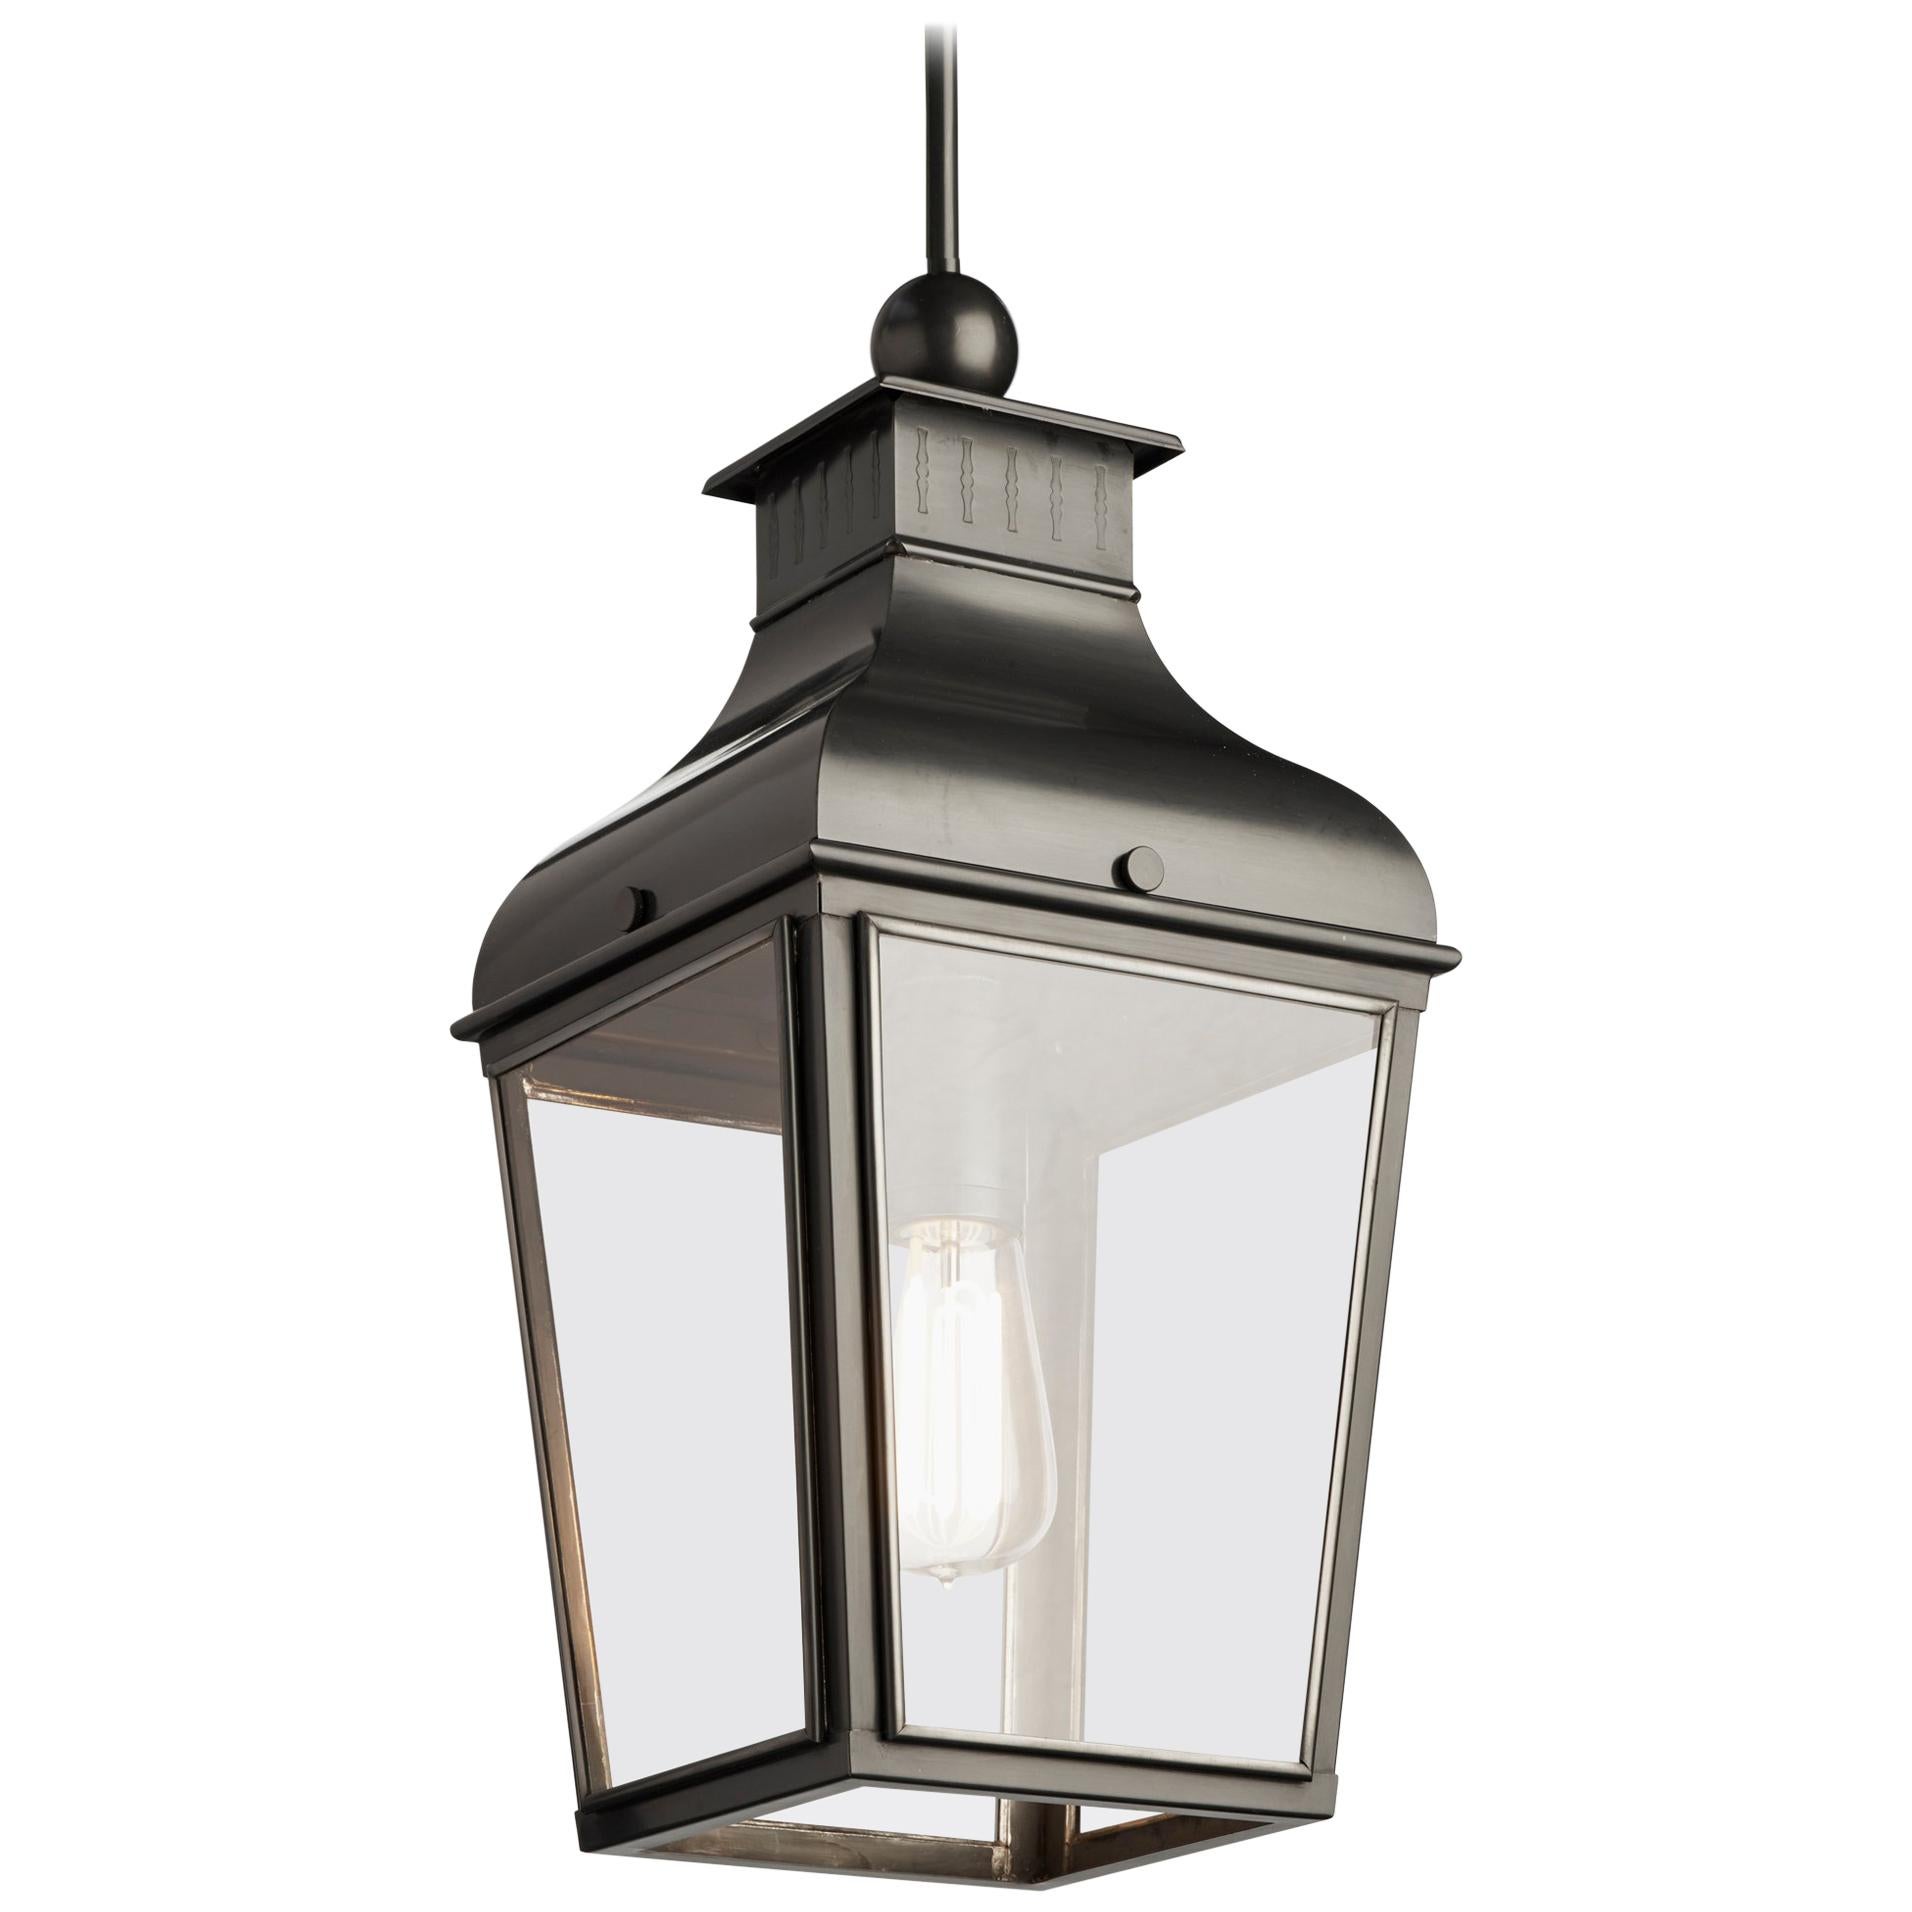 Tekna Montrose Small-C Pendant Light with Dark Bronze Finish and Clear Glass For Sale